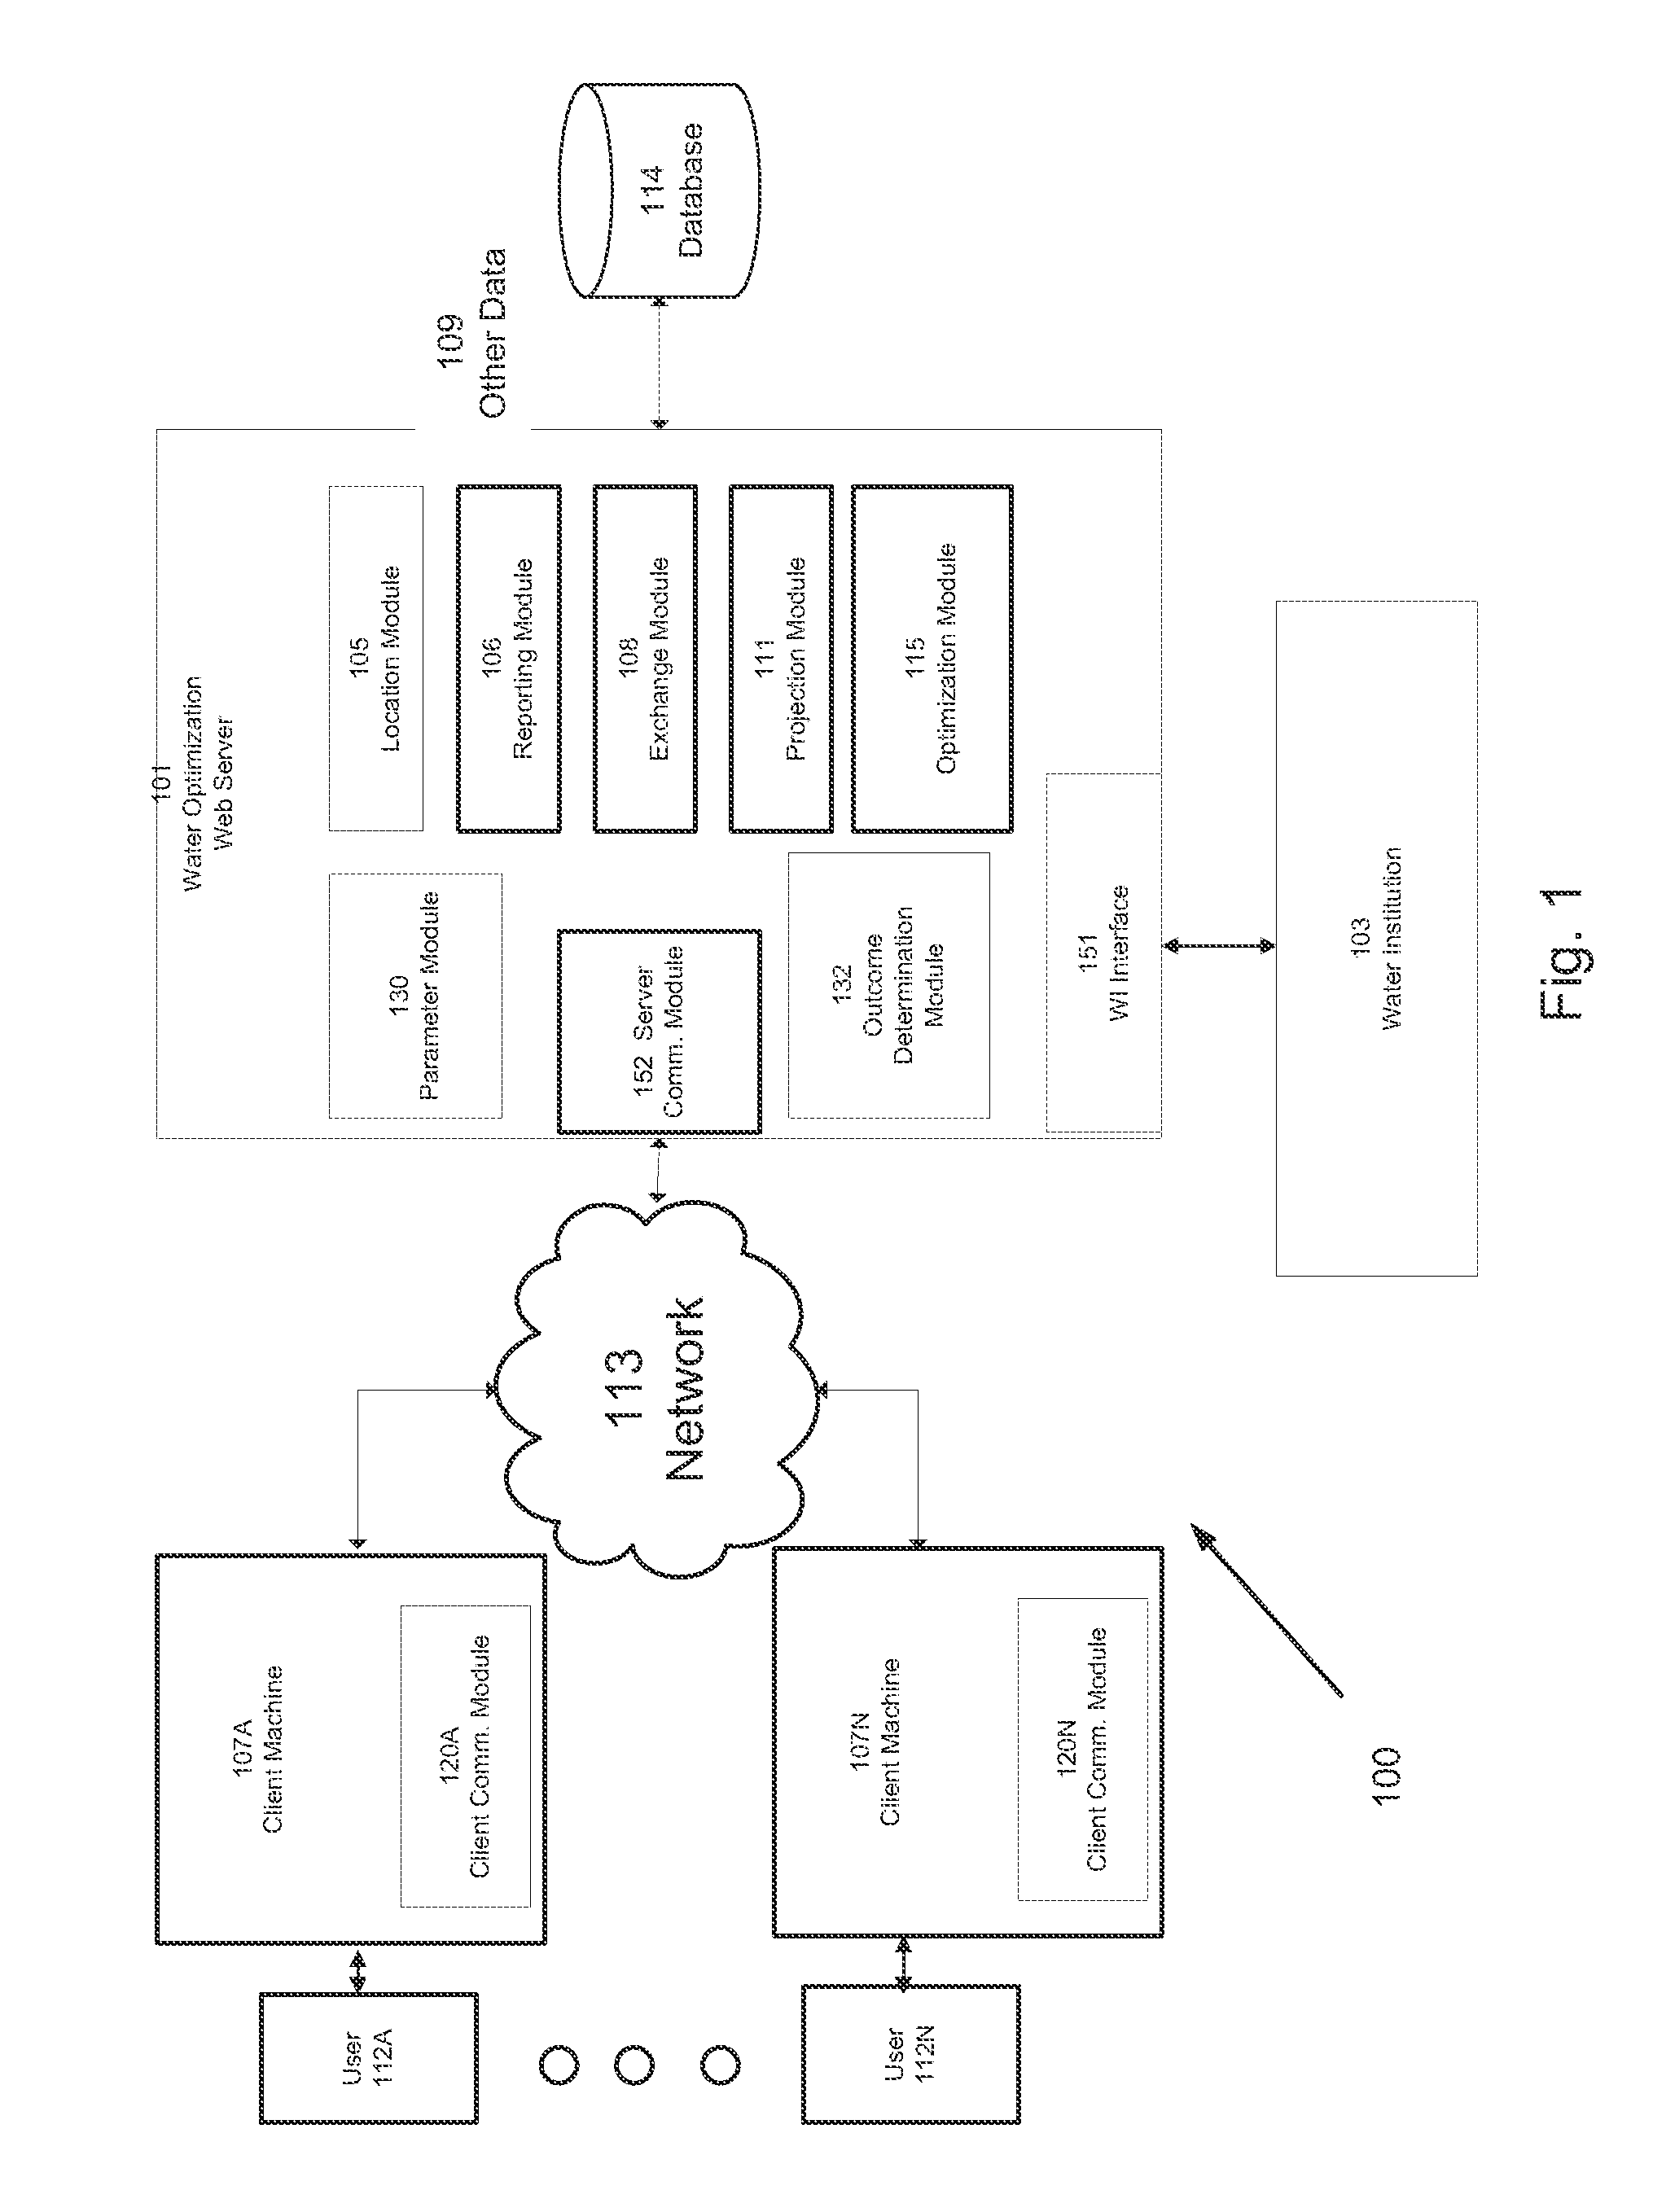 Systems and methods for optimized water allocation